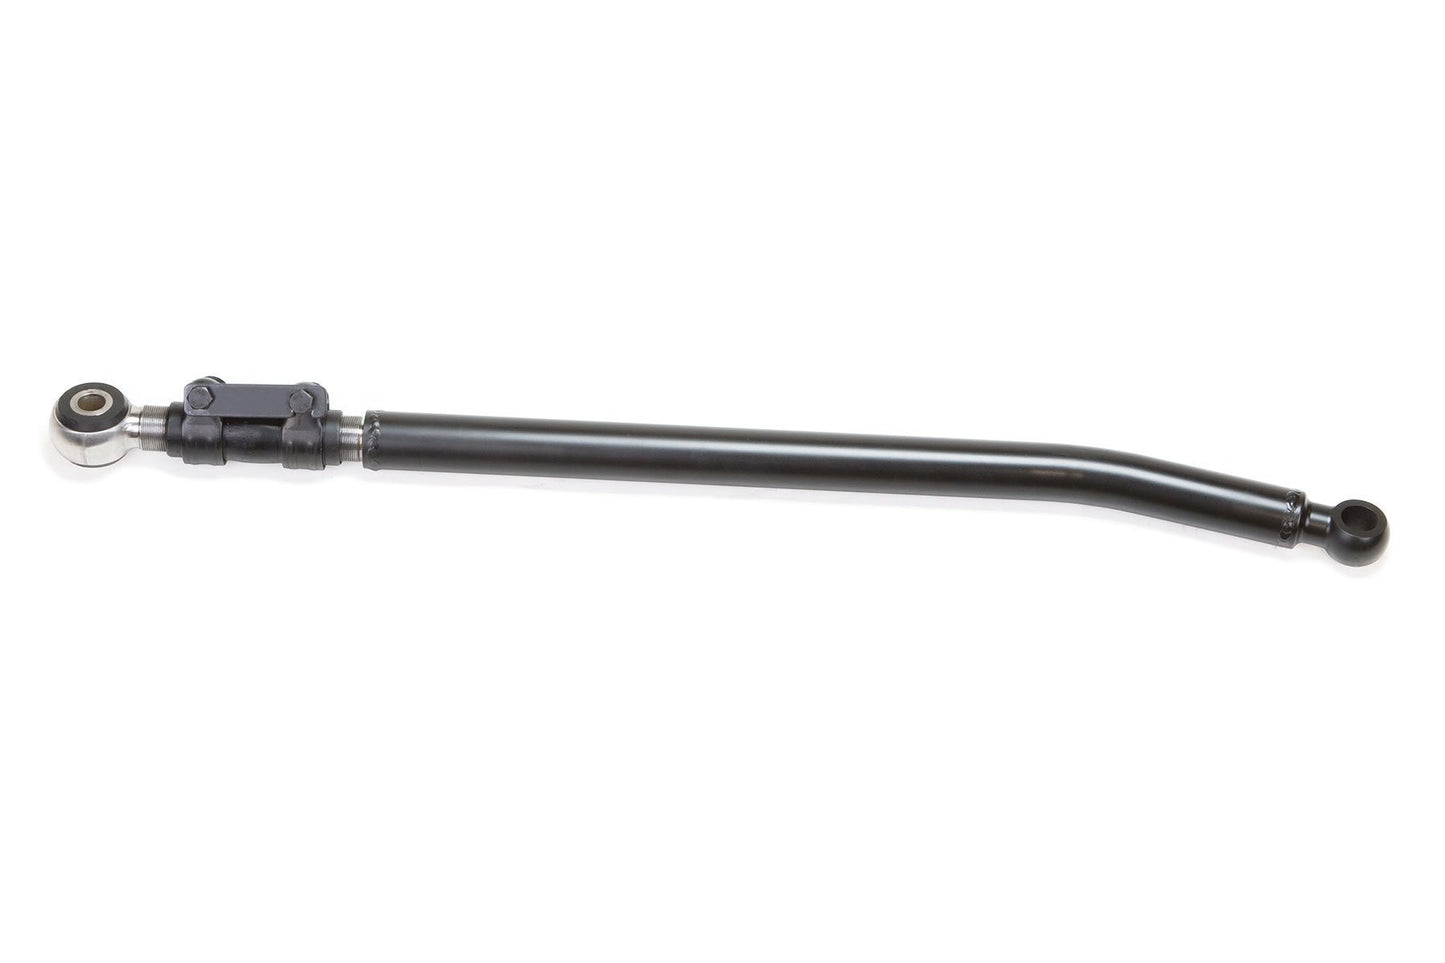 SD ADJUSTABLE TRACK BAR ONLY FOR 0-4" KITS - SD ADJUSTABLE TRACK - Fabtech - Texas Complete Truck Center